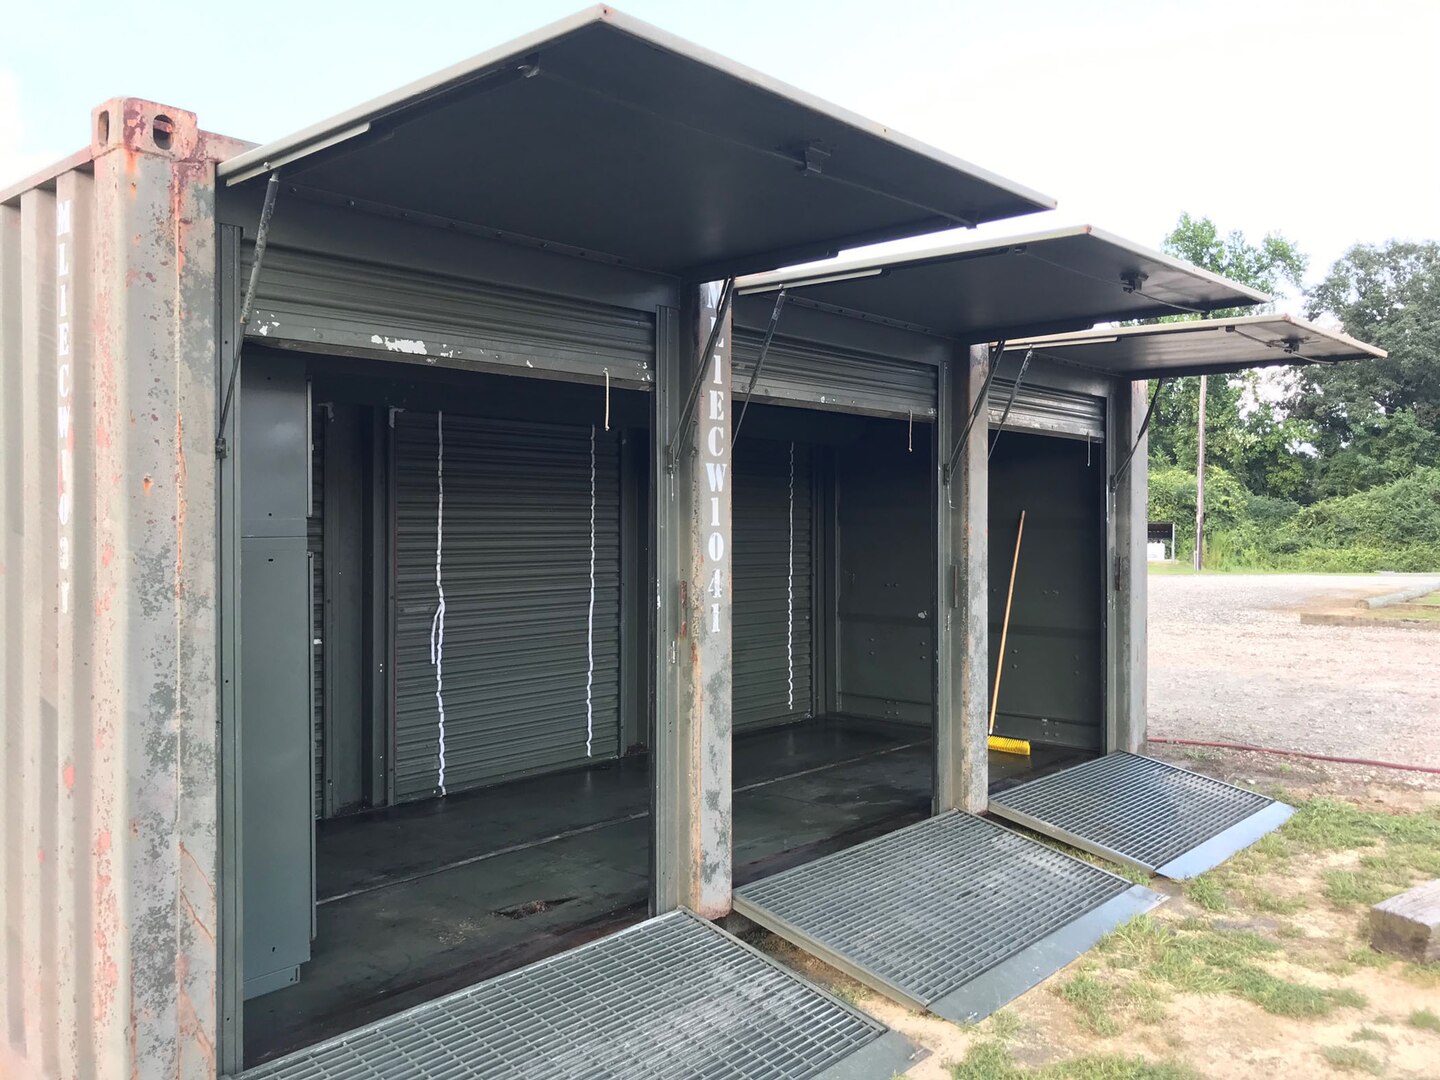 A former shipping container now serves as an area for storing parts and servicing other excess military items the Duplin County Sheriff’s Department also acquired from DLA Disposition Services at Camp Lejeune, North Carolina.